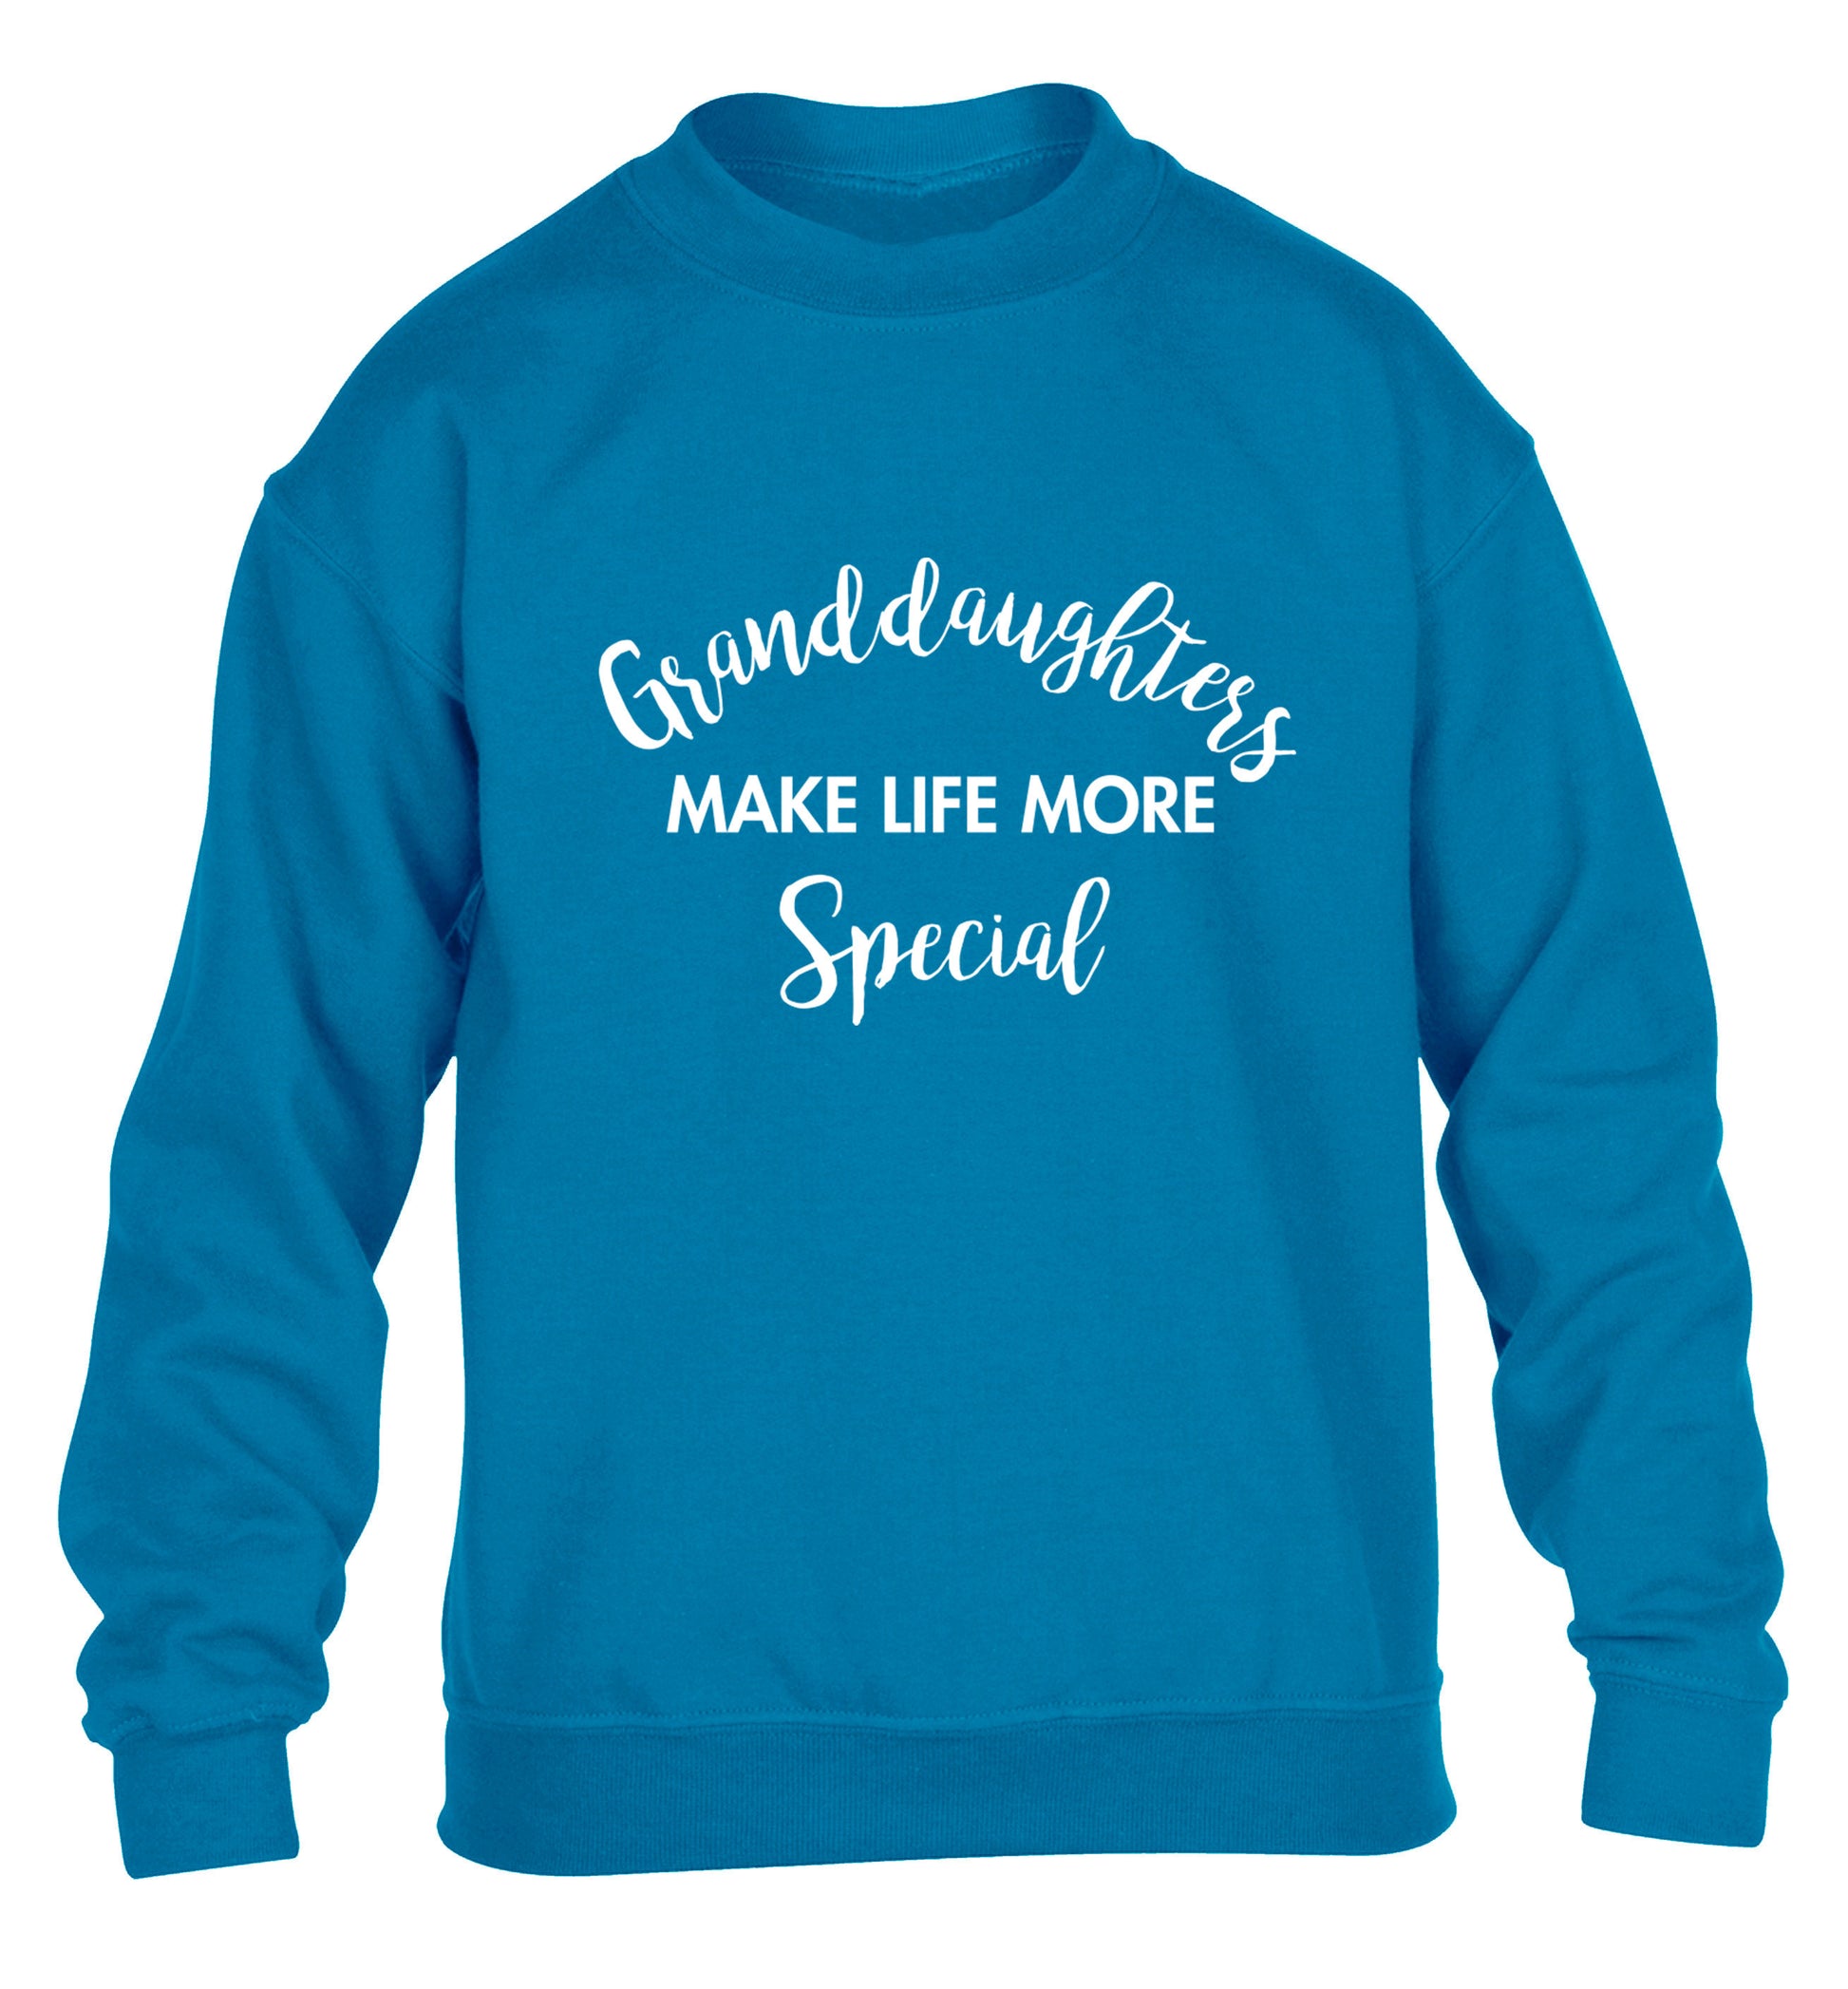 Granddaughters make life more special children's blue sweater 12-14 Years